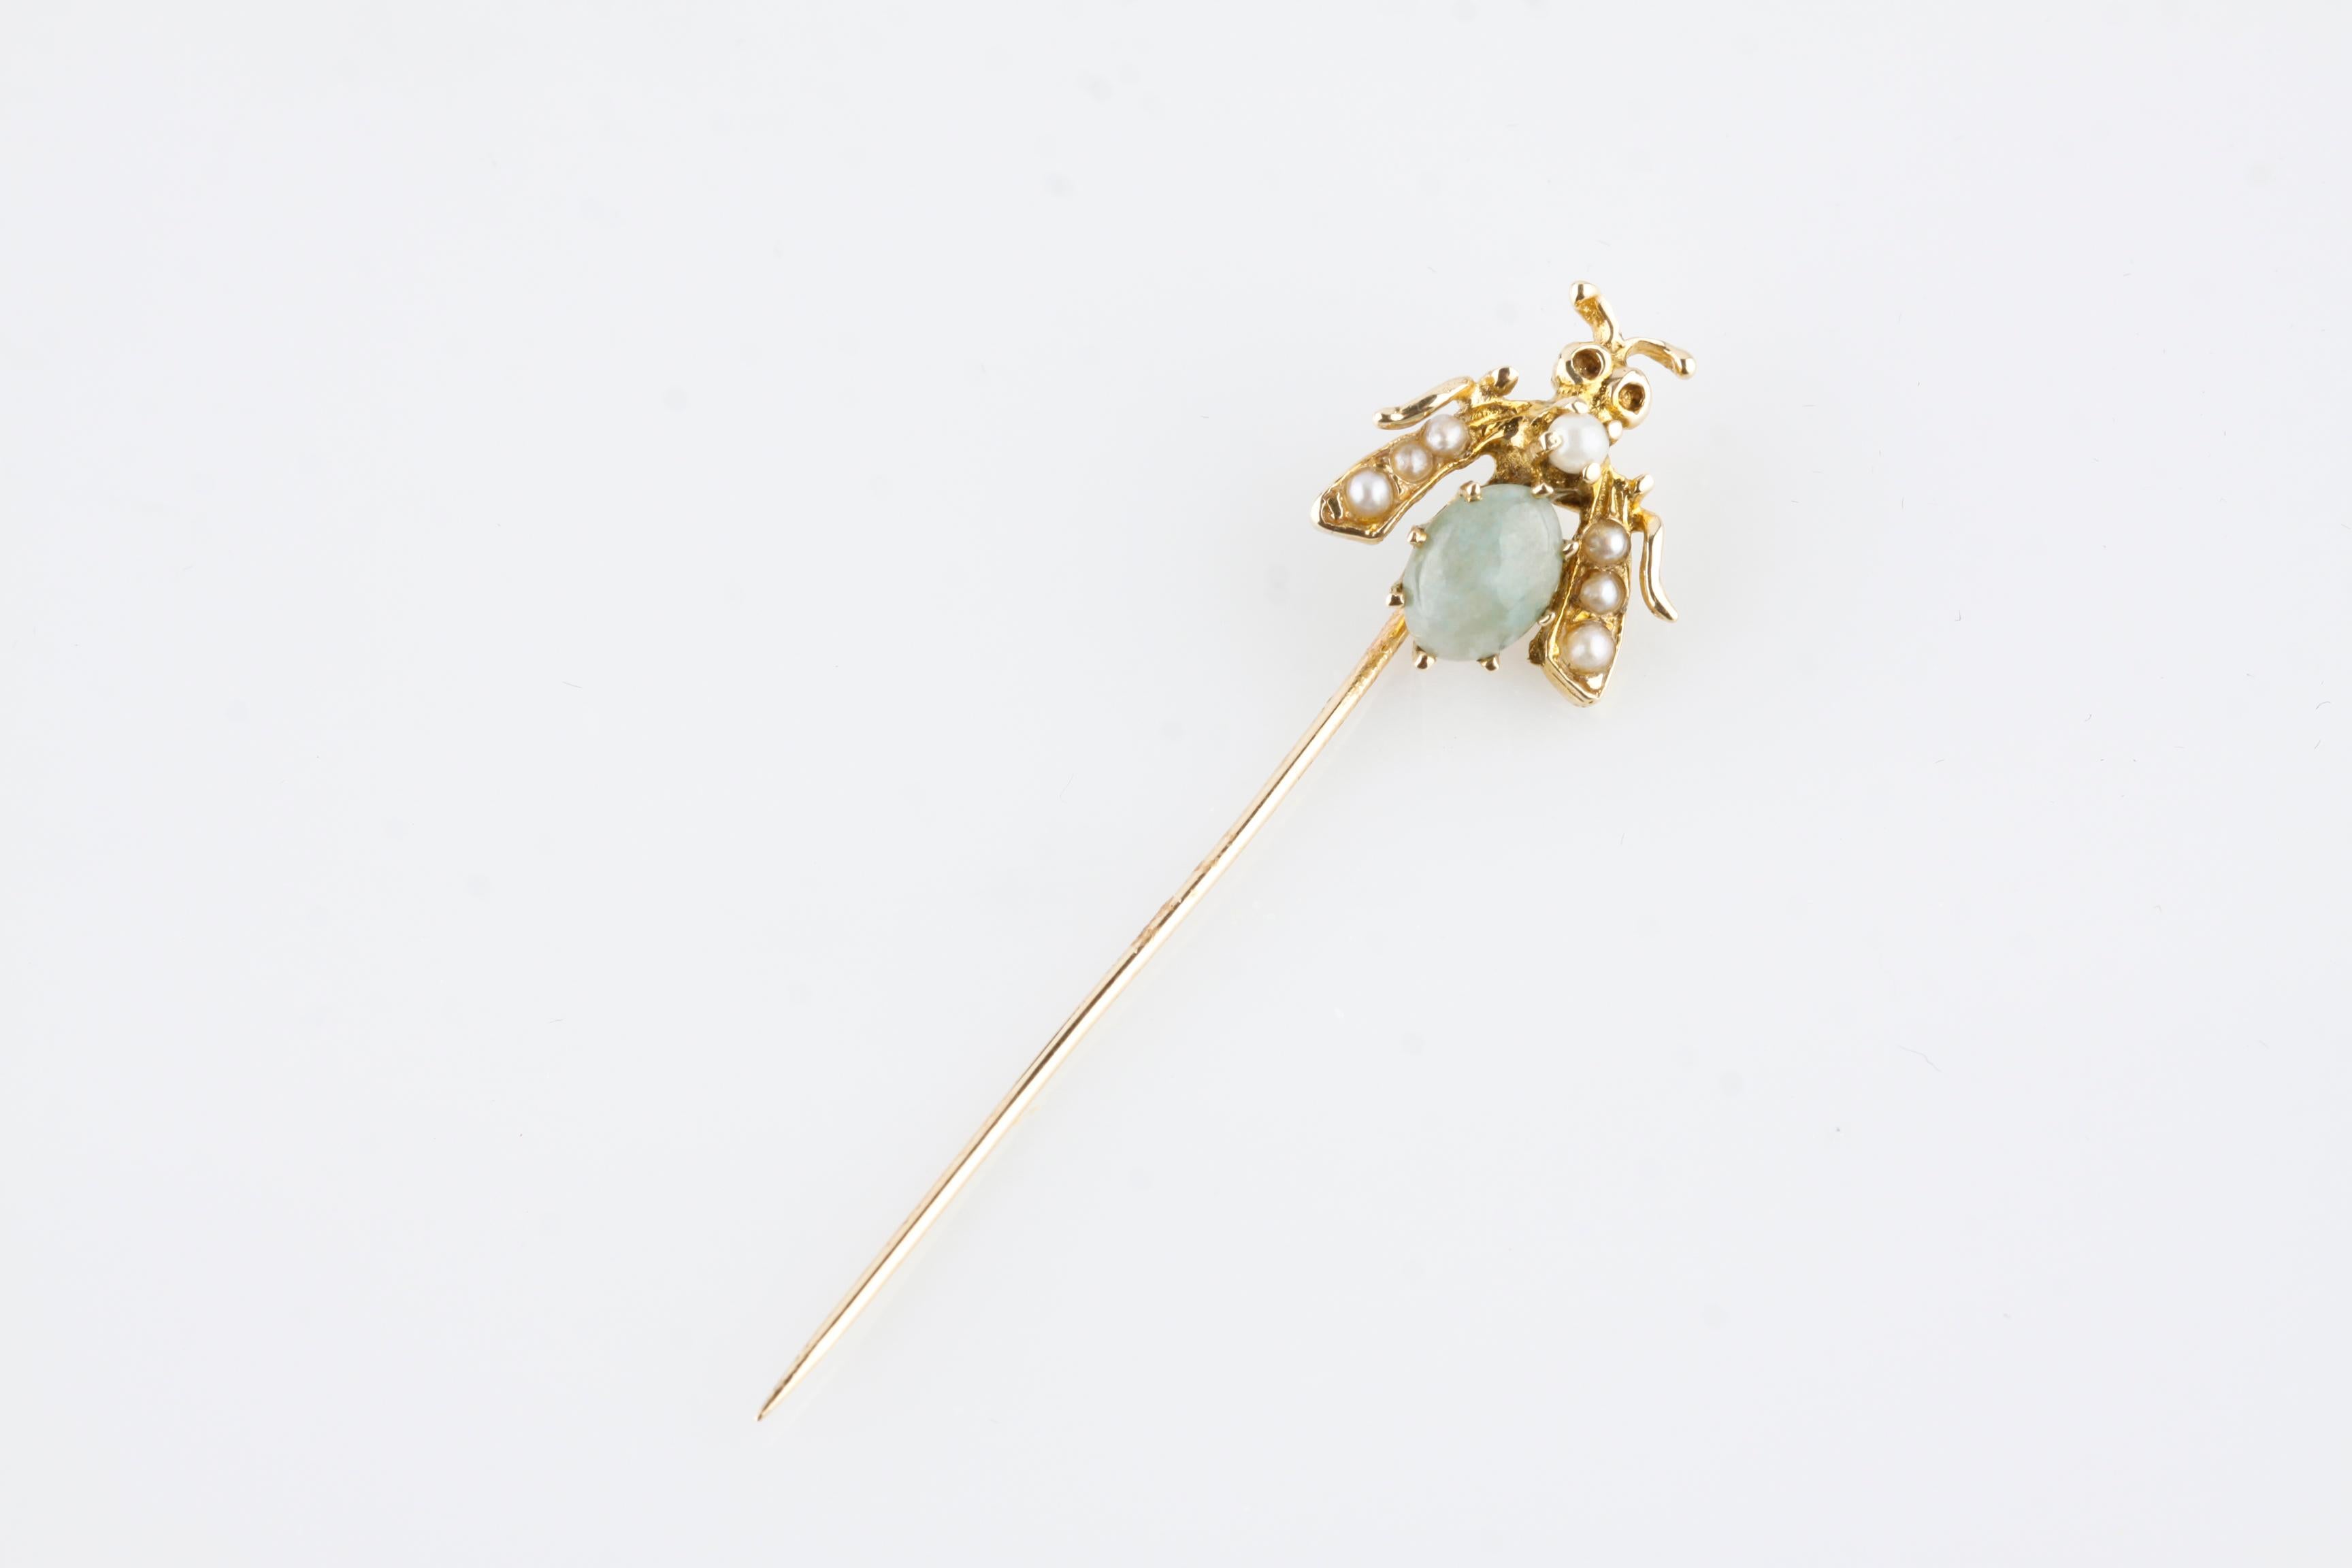 Gorgeous Fly Pin
Features Jadeite Cabochon with Seed Pearl Accents
Total Length of Pin = 49 mm
Total Length of Insect = 15 mm
Total Mass = 1.7 grams
Piece is in Good Condition. Shows Few Signs of Aging or Wear.
Gorgeous Gift!